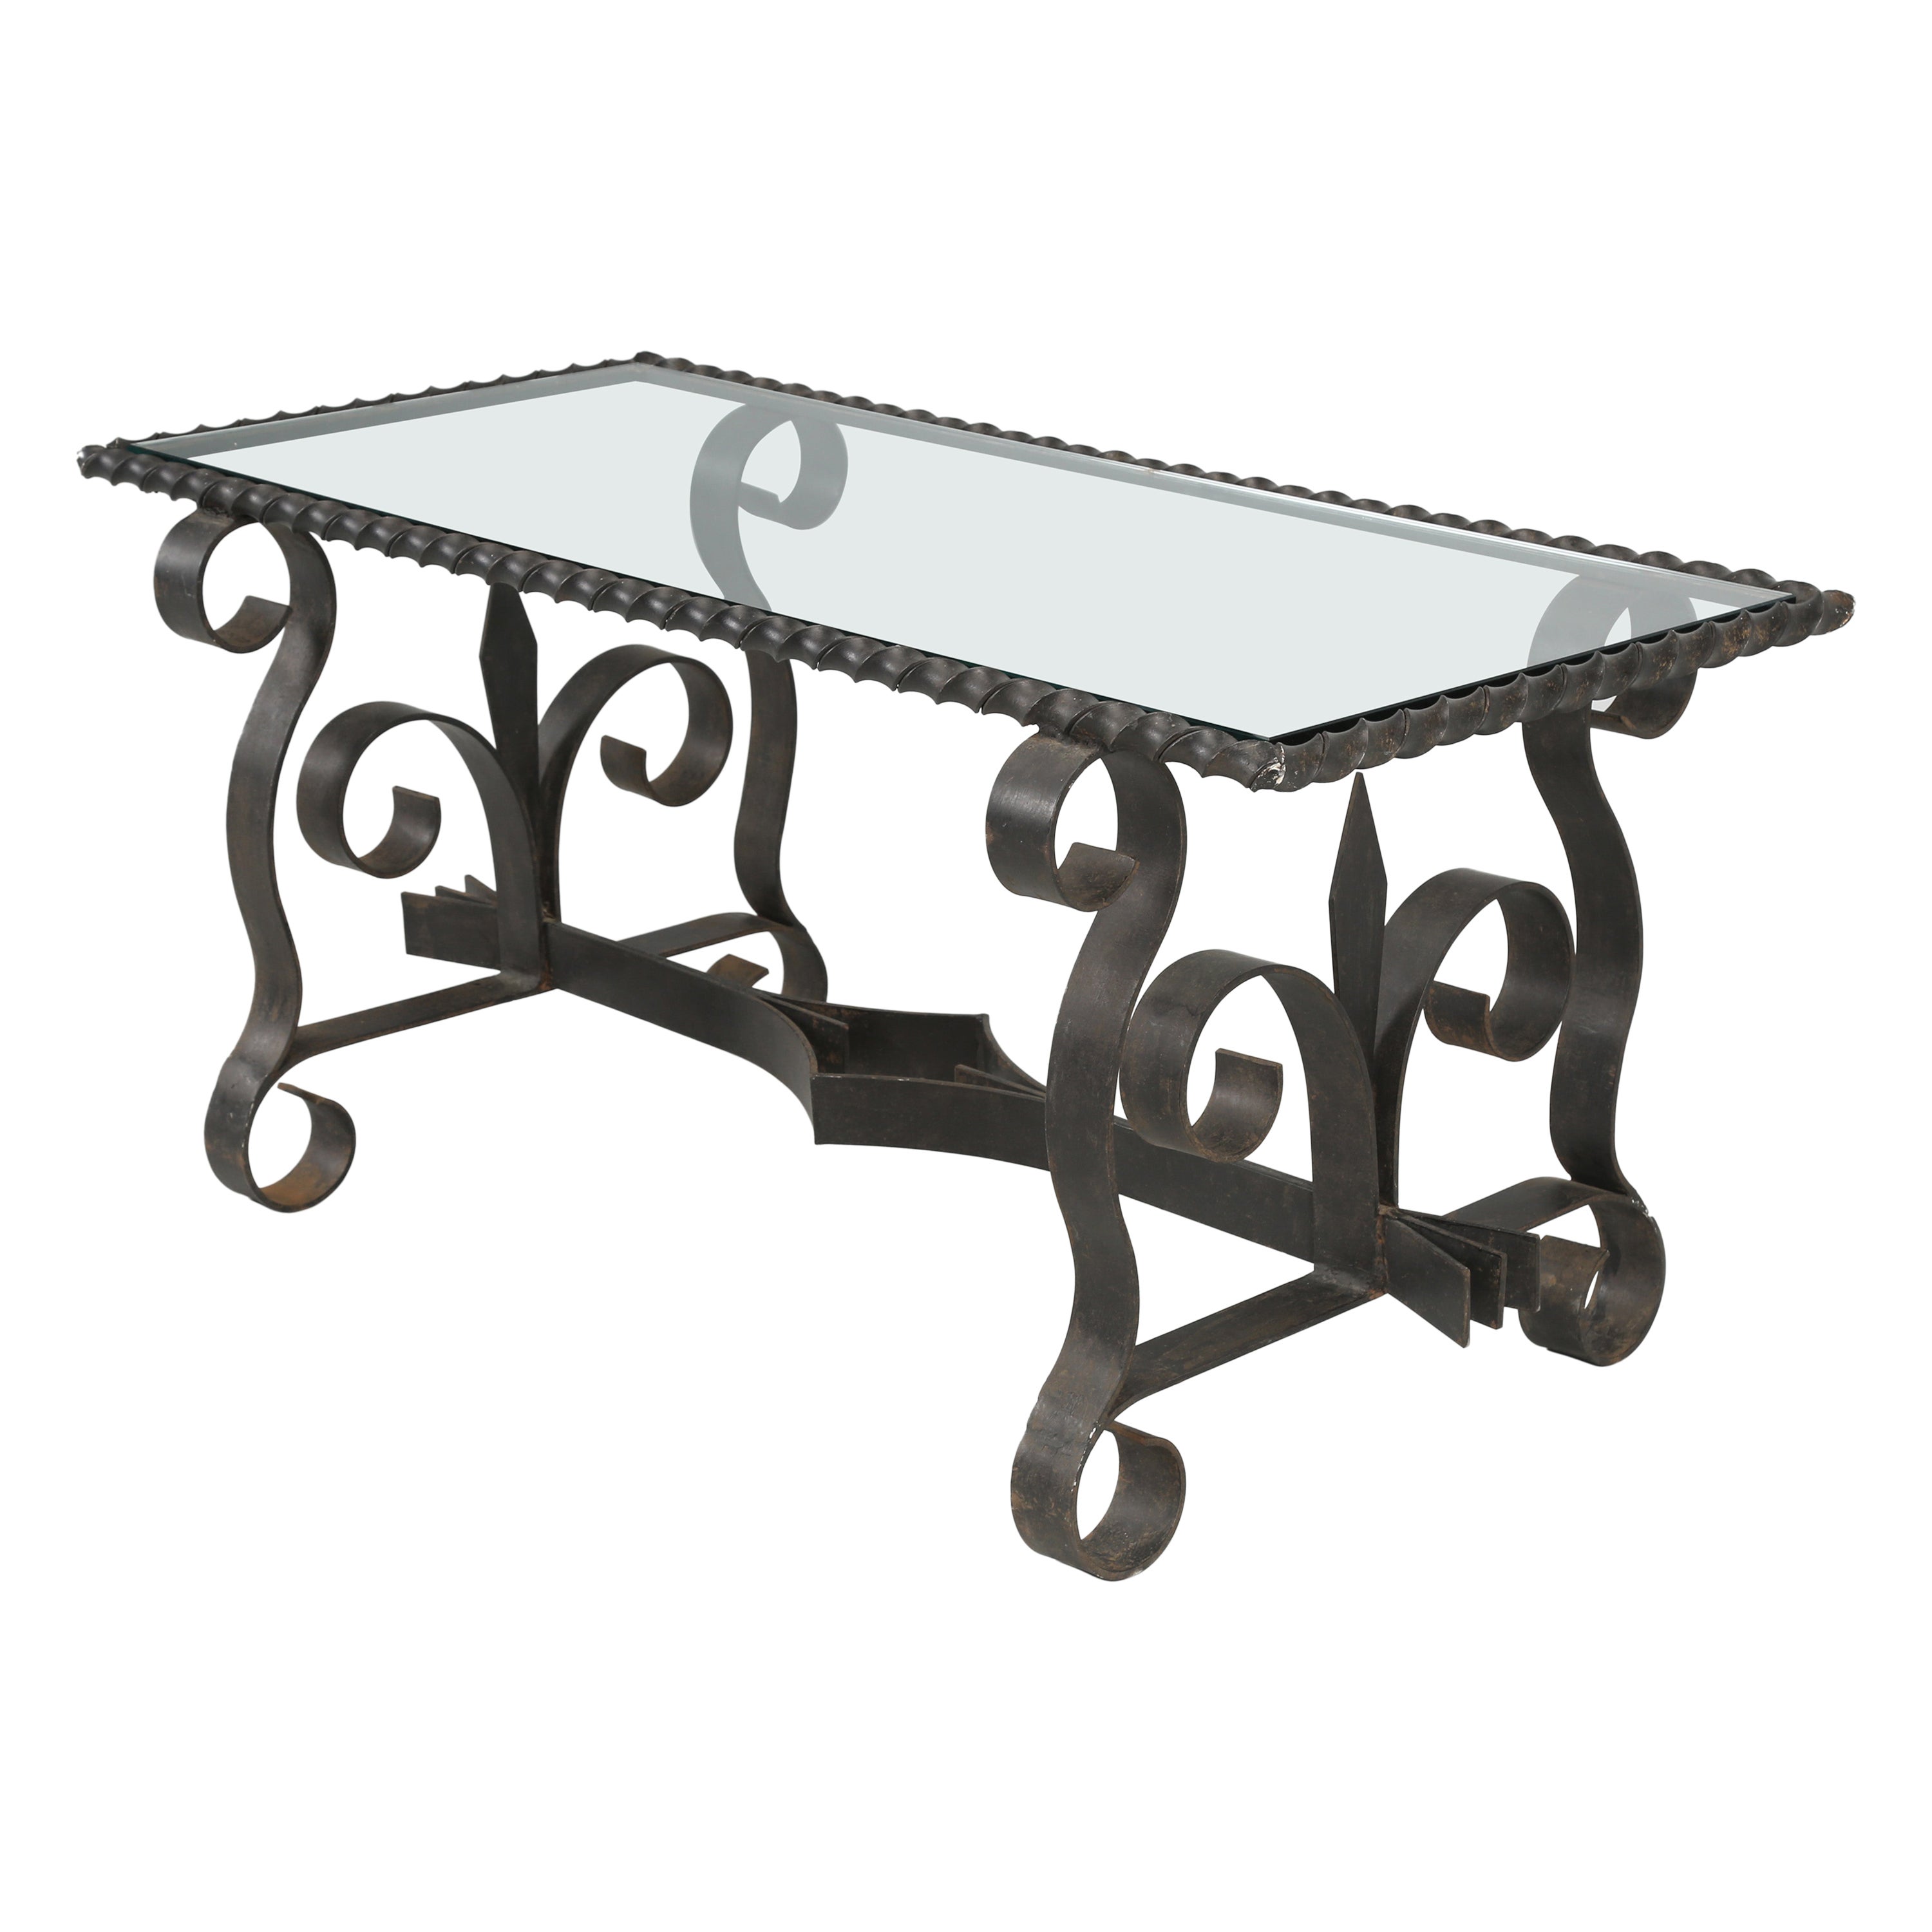 Vintage French Wrought iron and Glass Coffee Table circa 1950's to 1960's